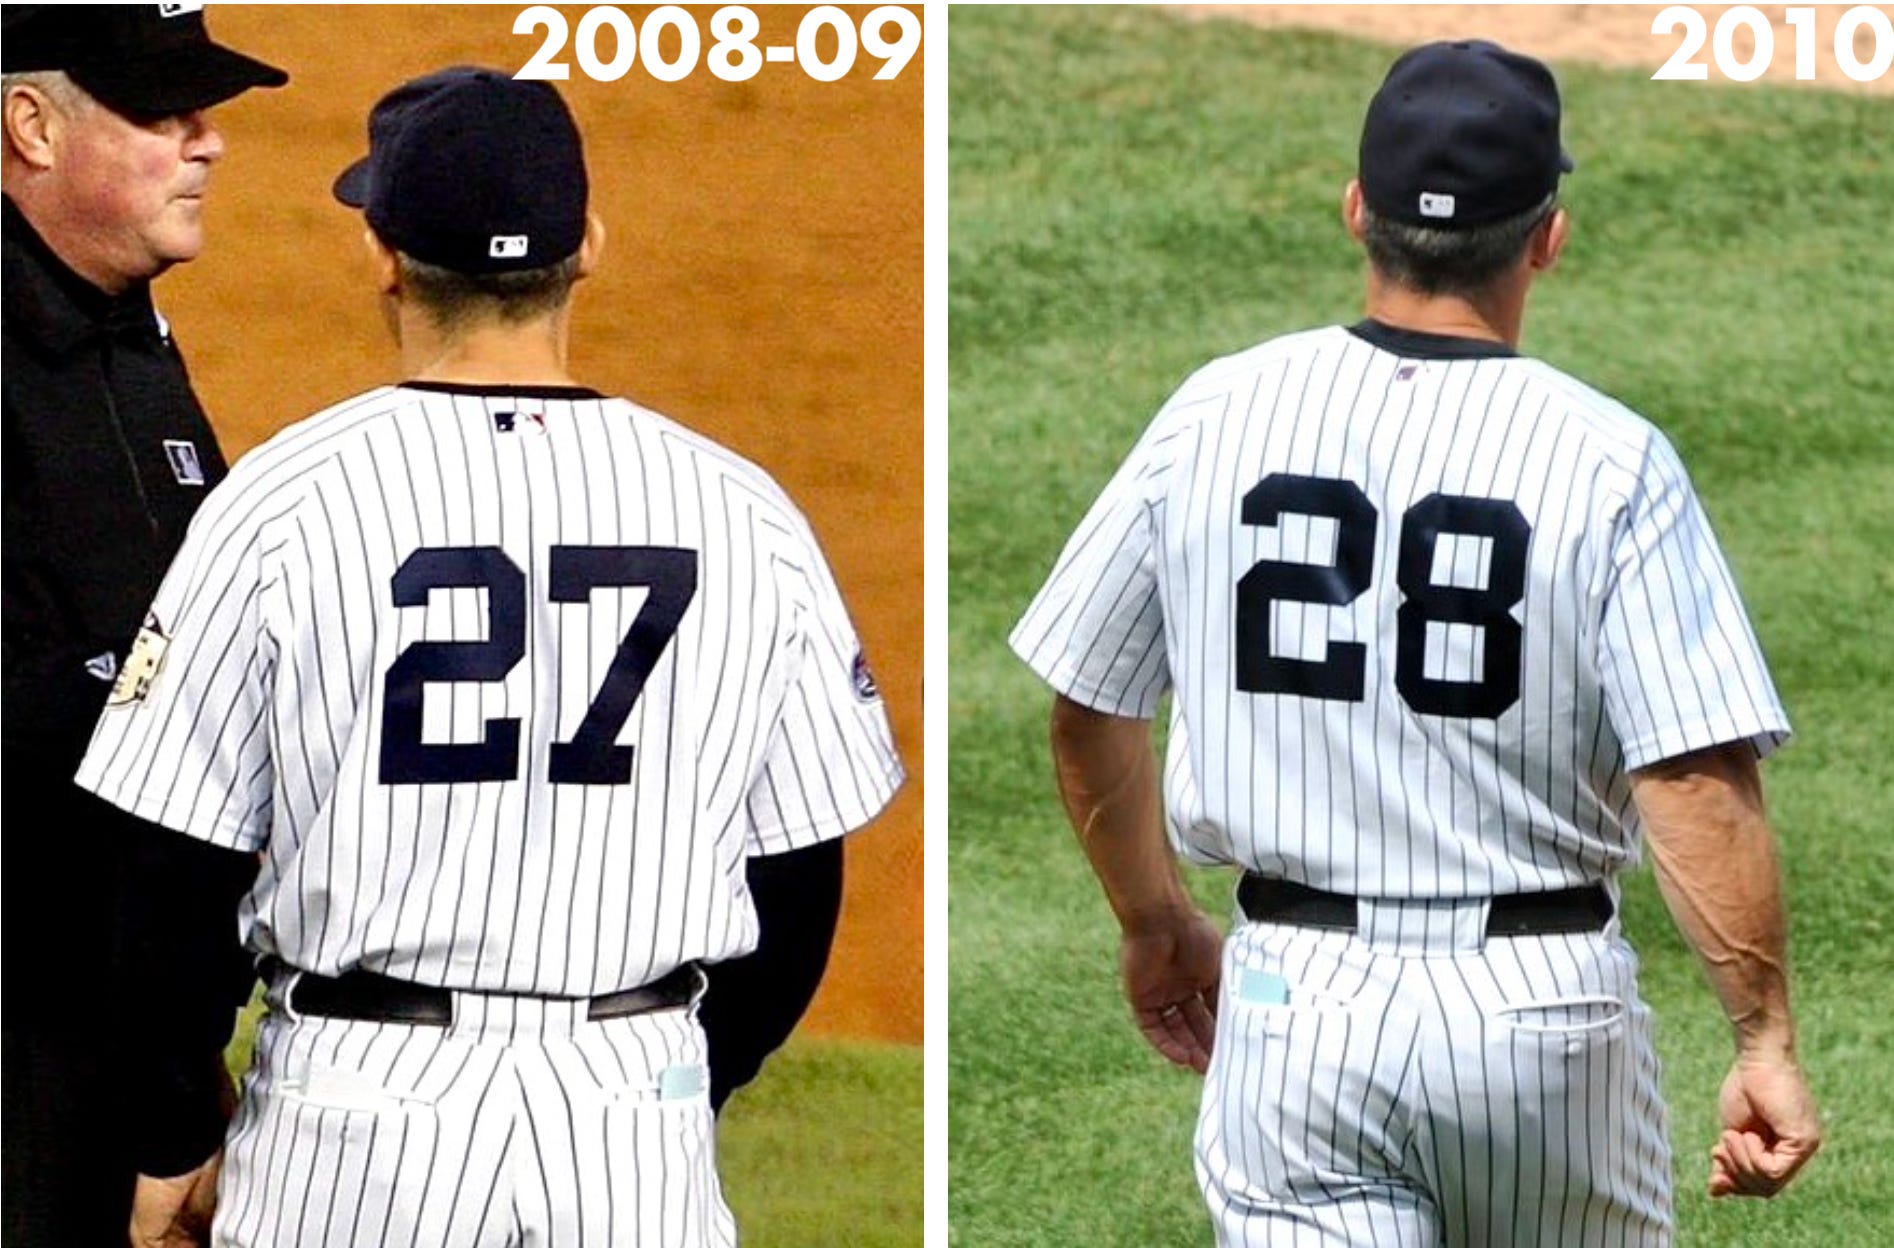 Yankees want to stop issuing jersey numbers to manager/coaches